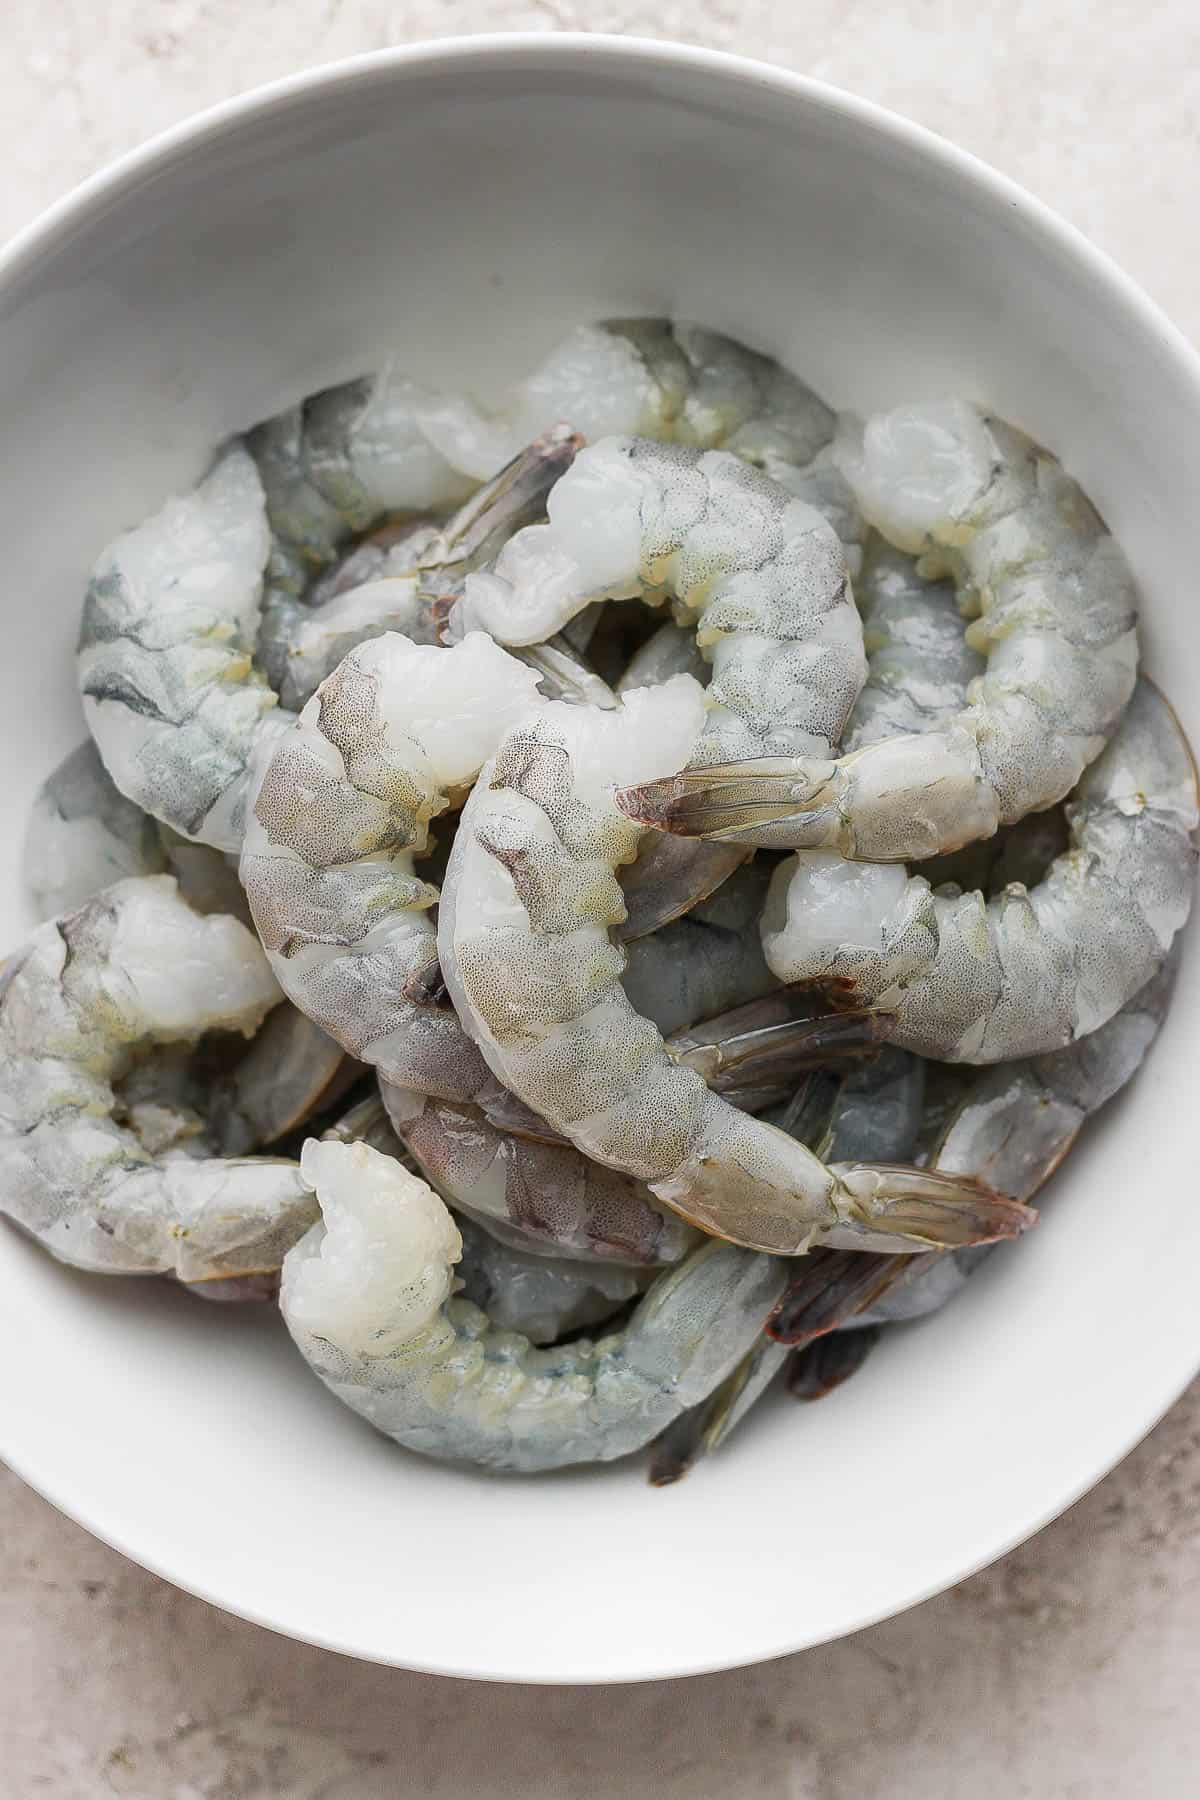 Raw, tail-on jumbo shrimp in a bowl.